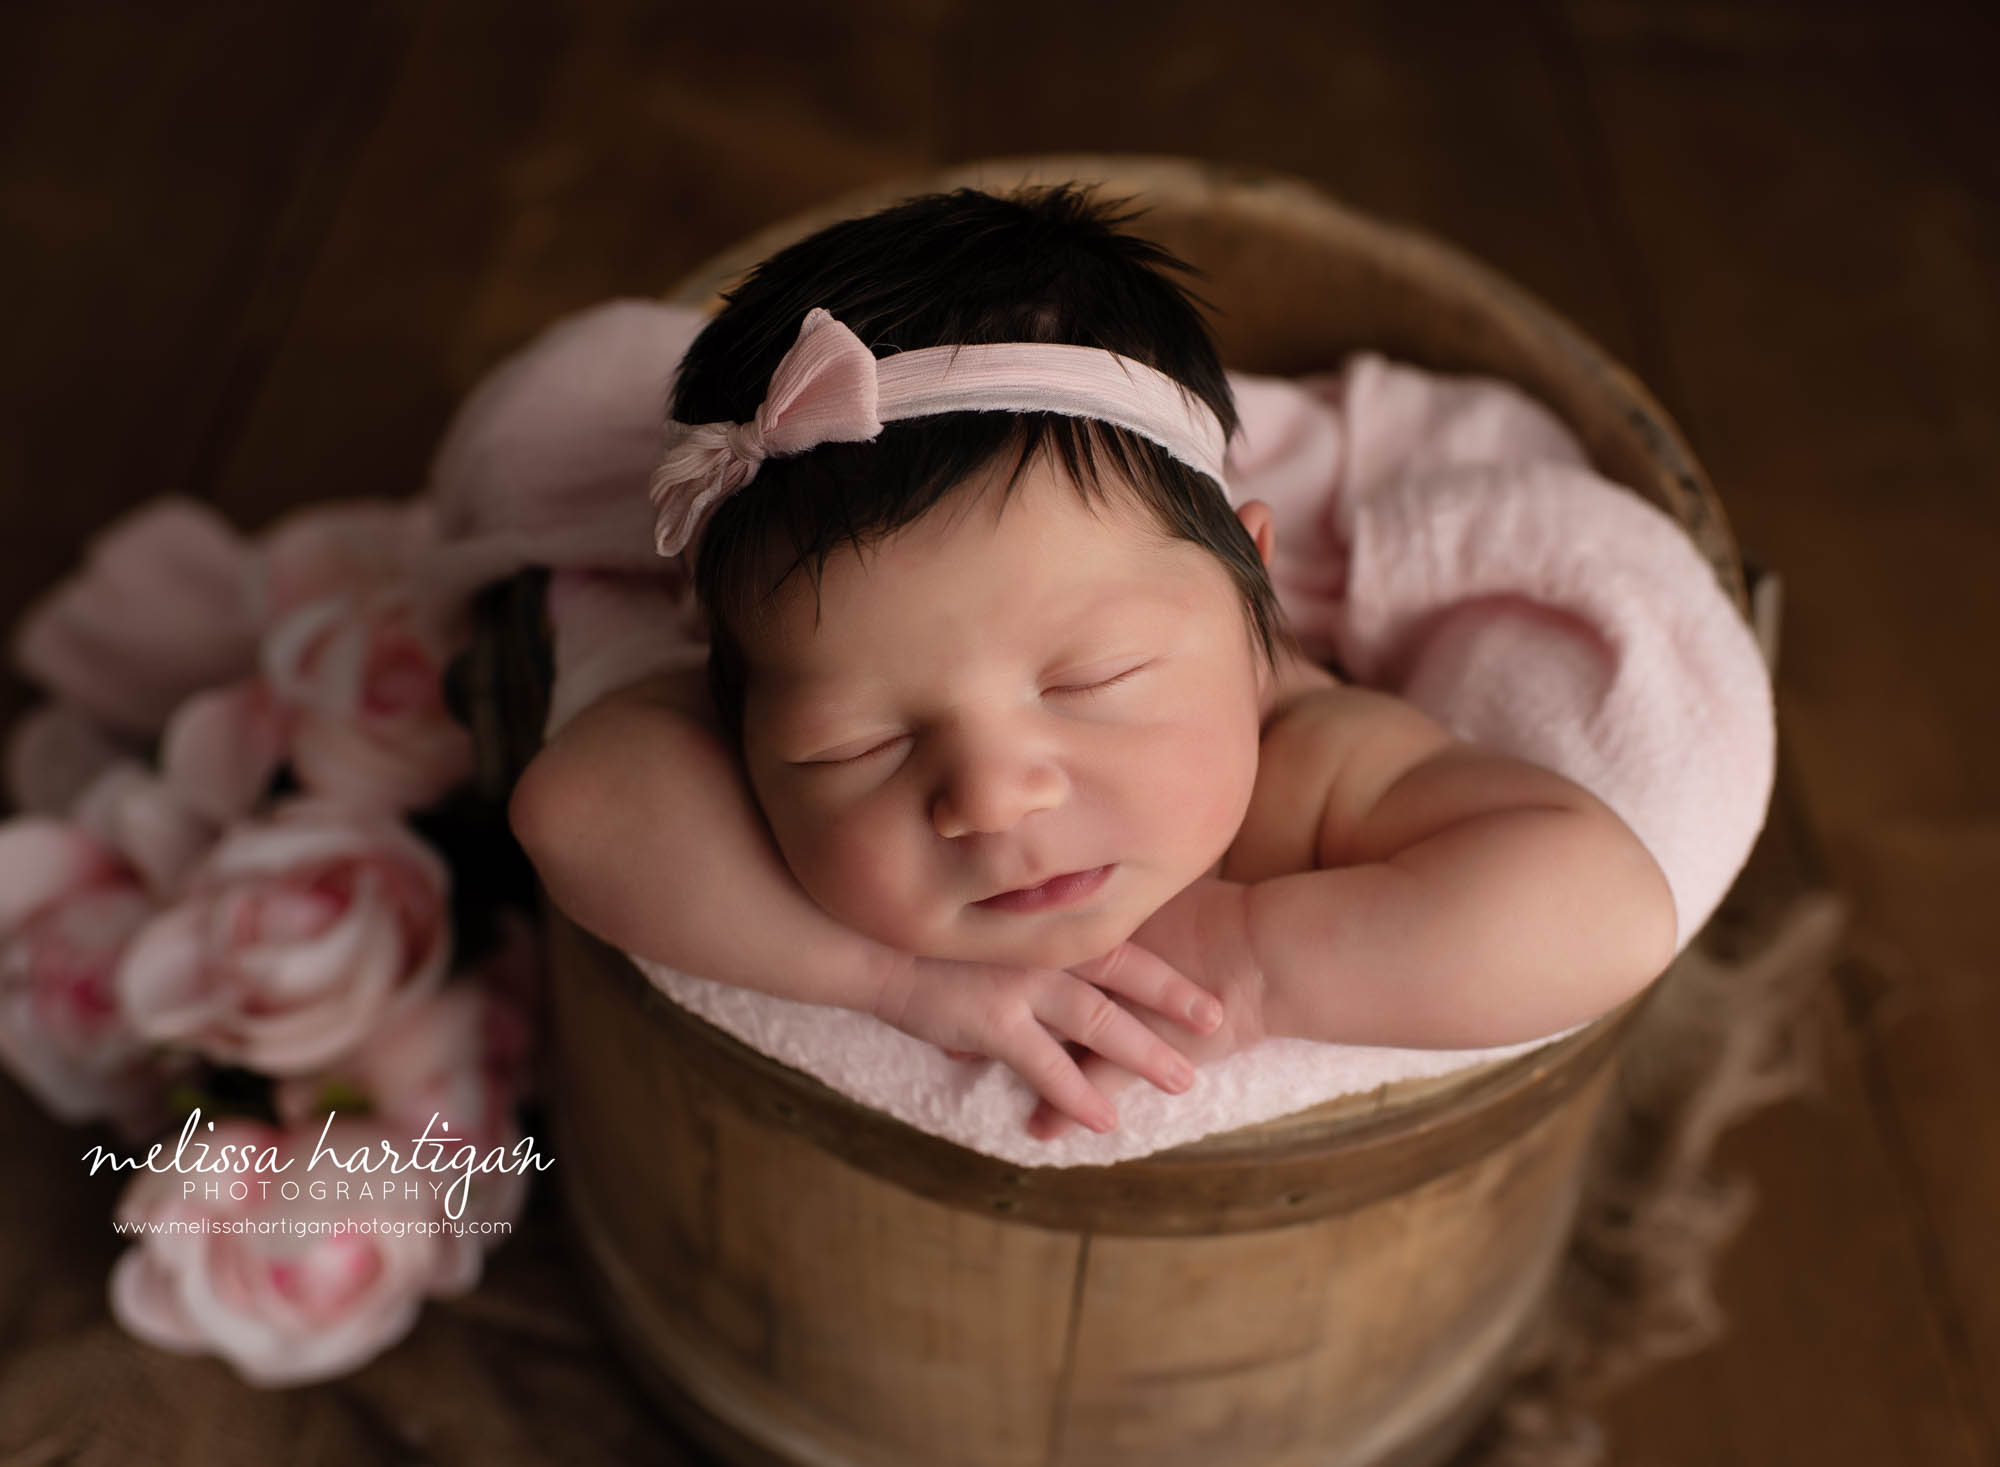 Baby girl with head on hands posed in bucket with pink flowers Waterbury Newborn Photographer